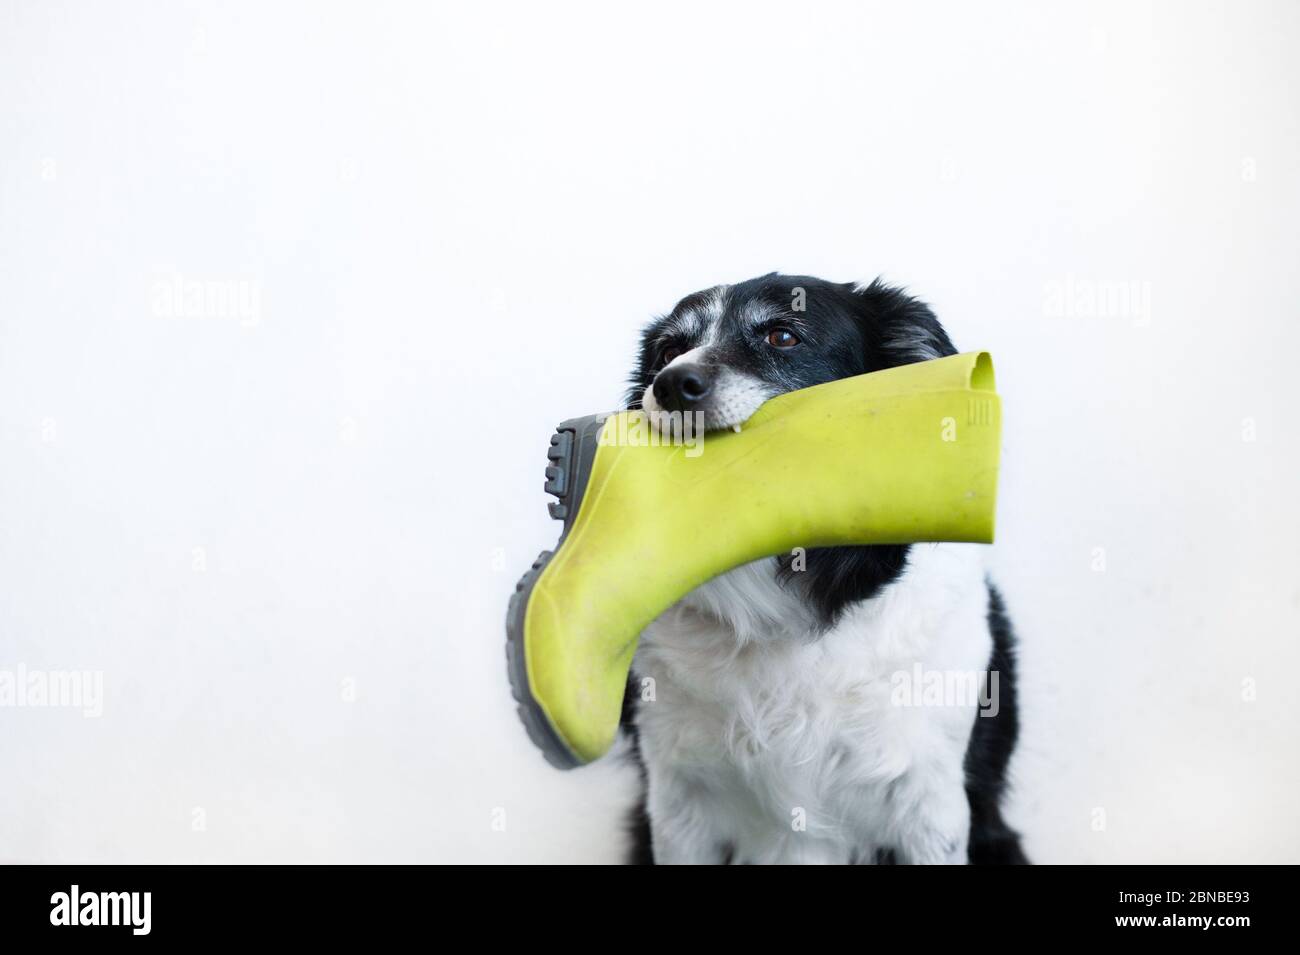 Cute black and white border collie. Dog with green rubber boot in his mouth. Stock Photo